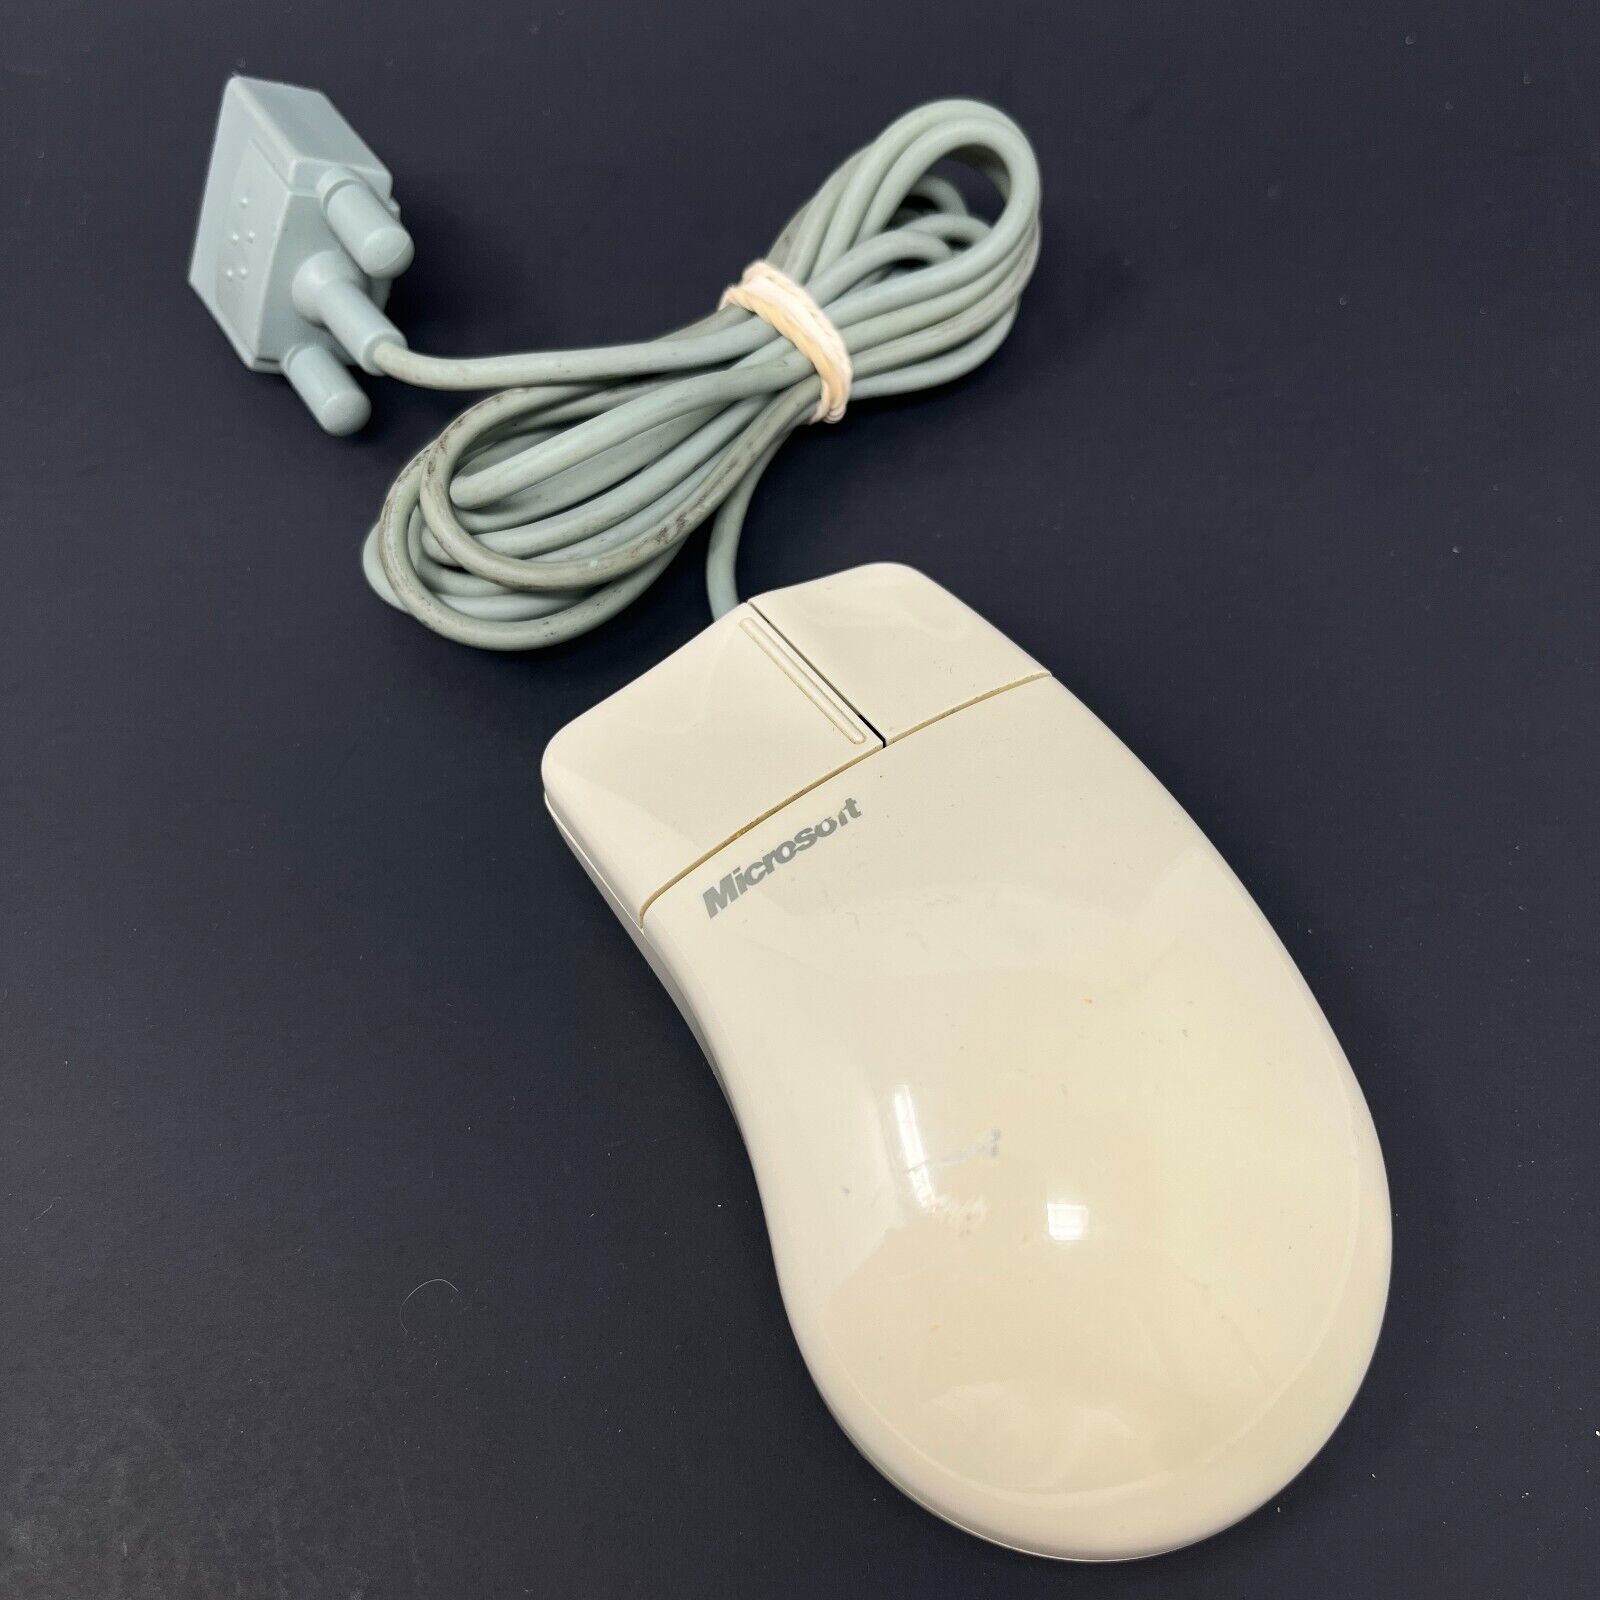 Vintage Microsoft Serial Mouse 37964 C3KMS1 9-pin 2-button